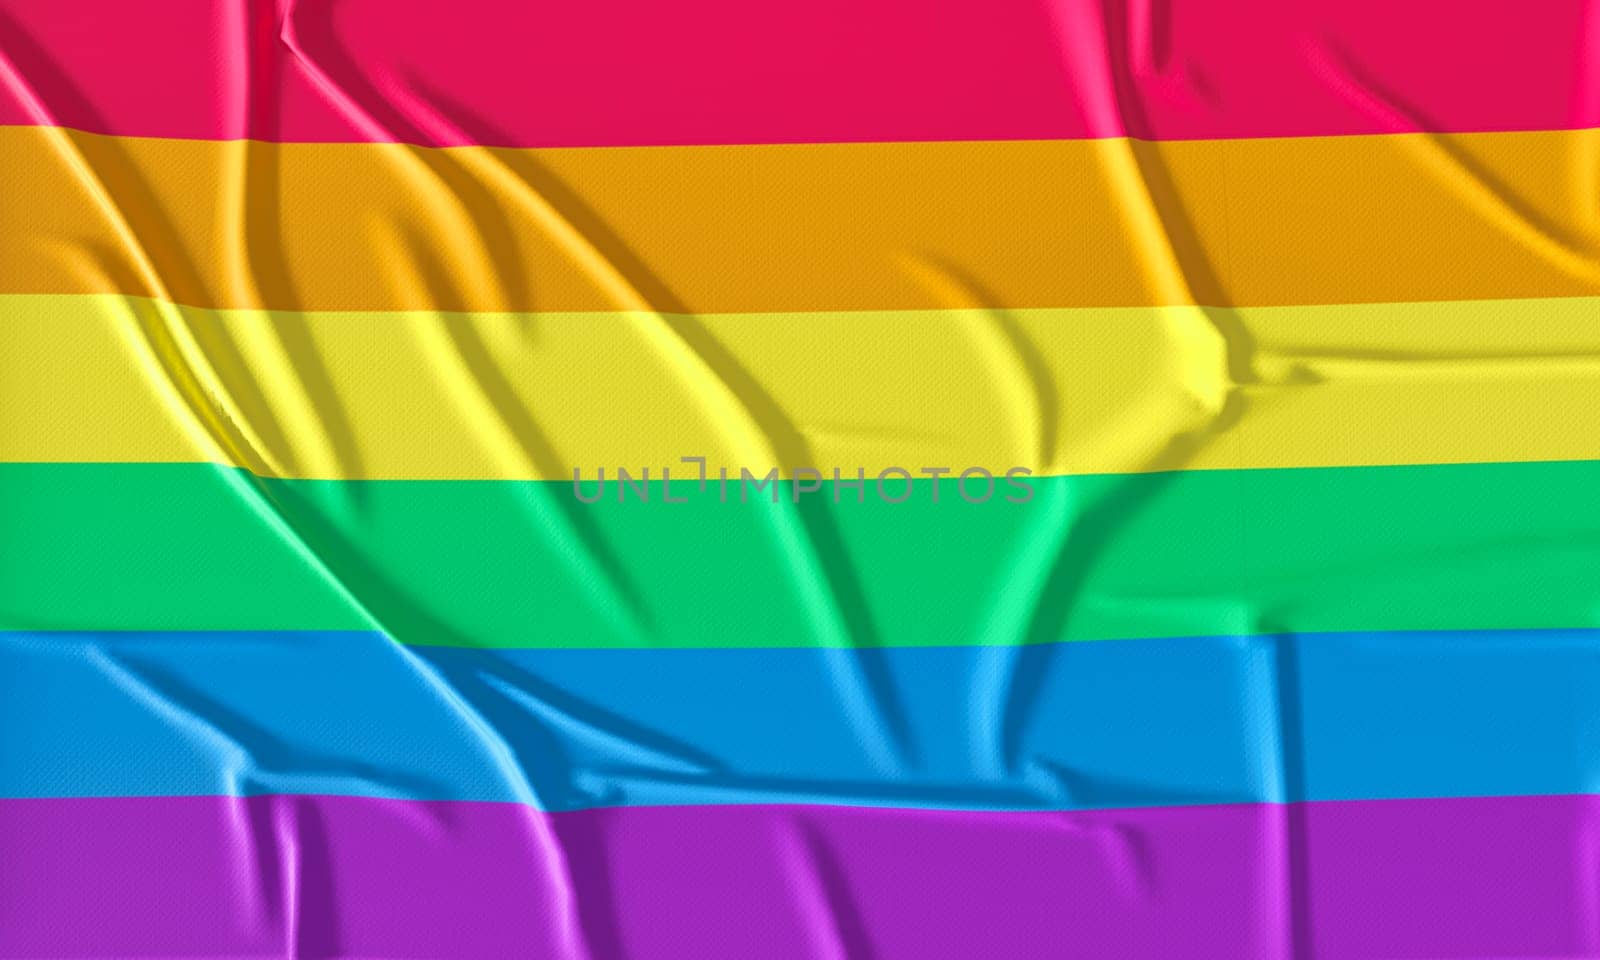 Rainbow flag pride day on wall background. Celebrates LGBT pride month.